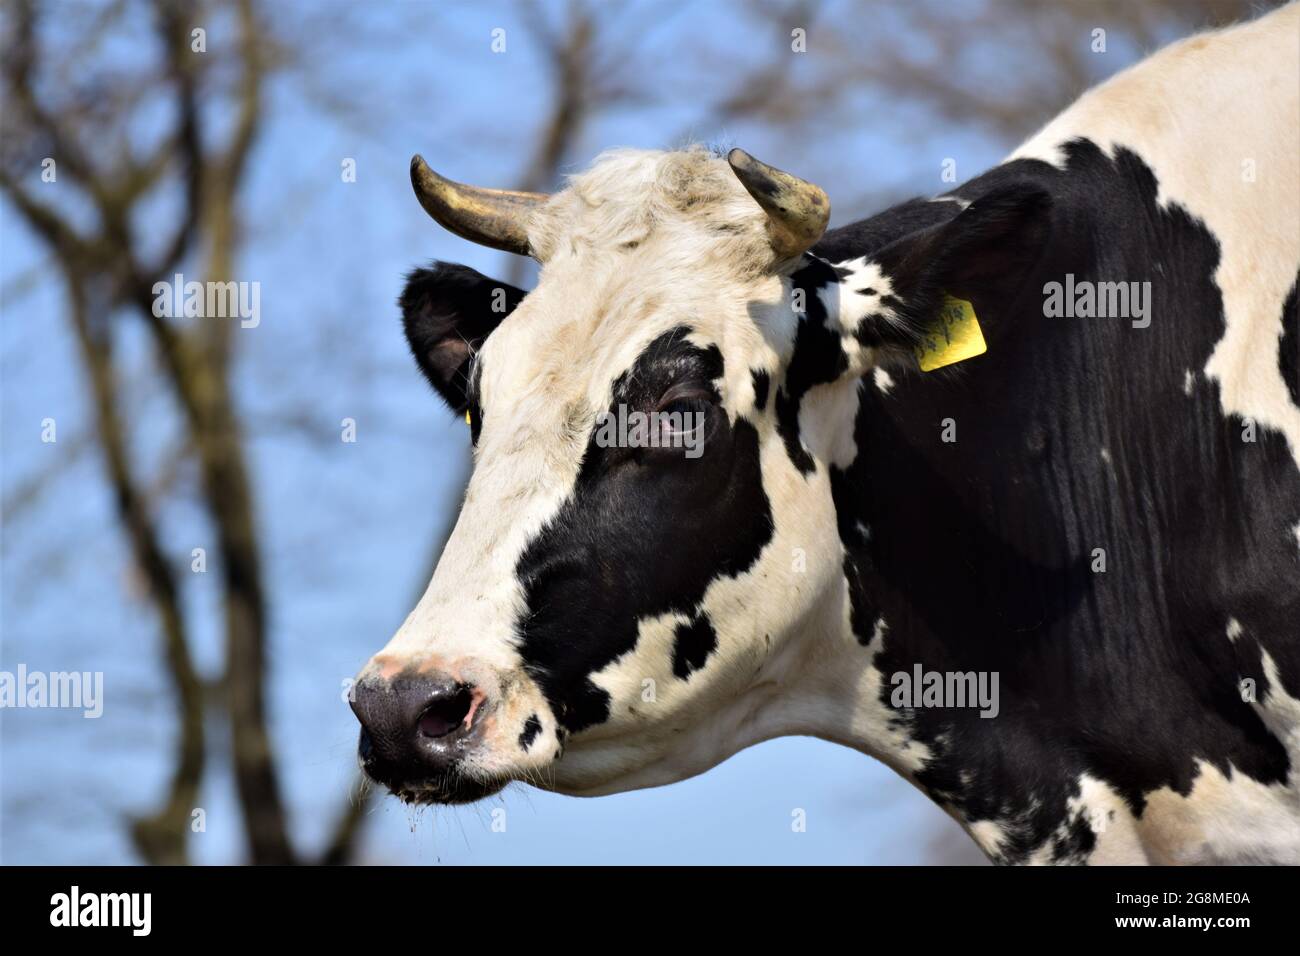 Portrait of the head of a black and white cow against a blue sky with trees Stock Photo